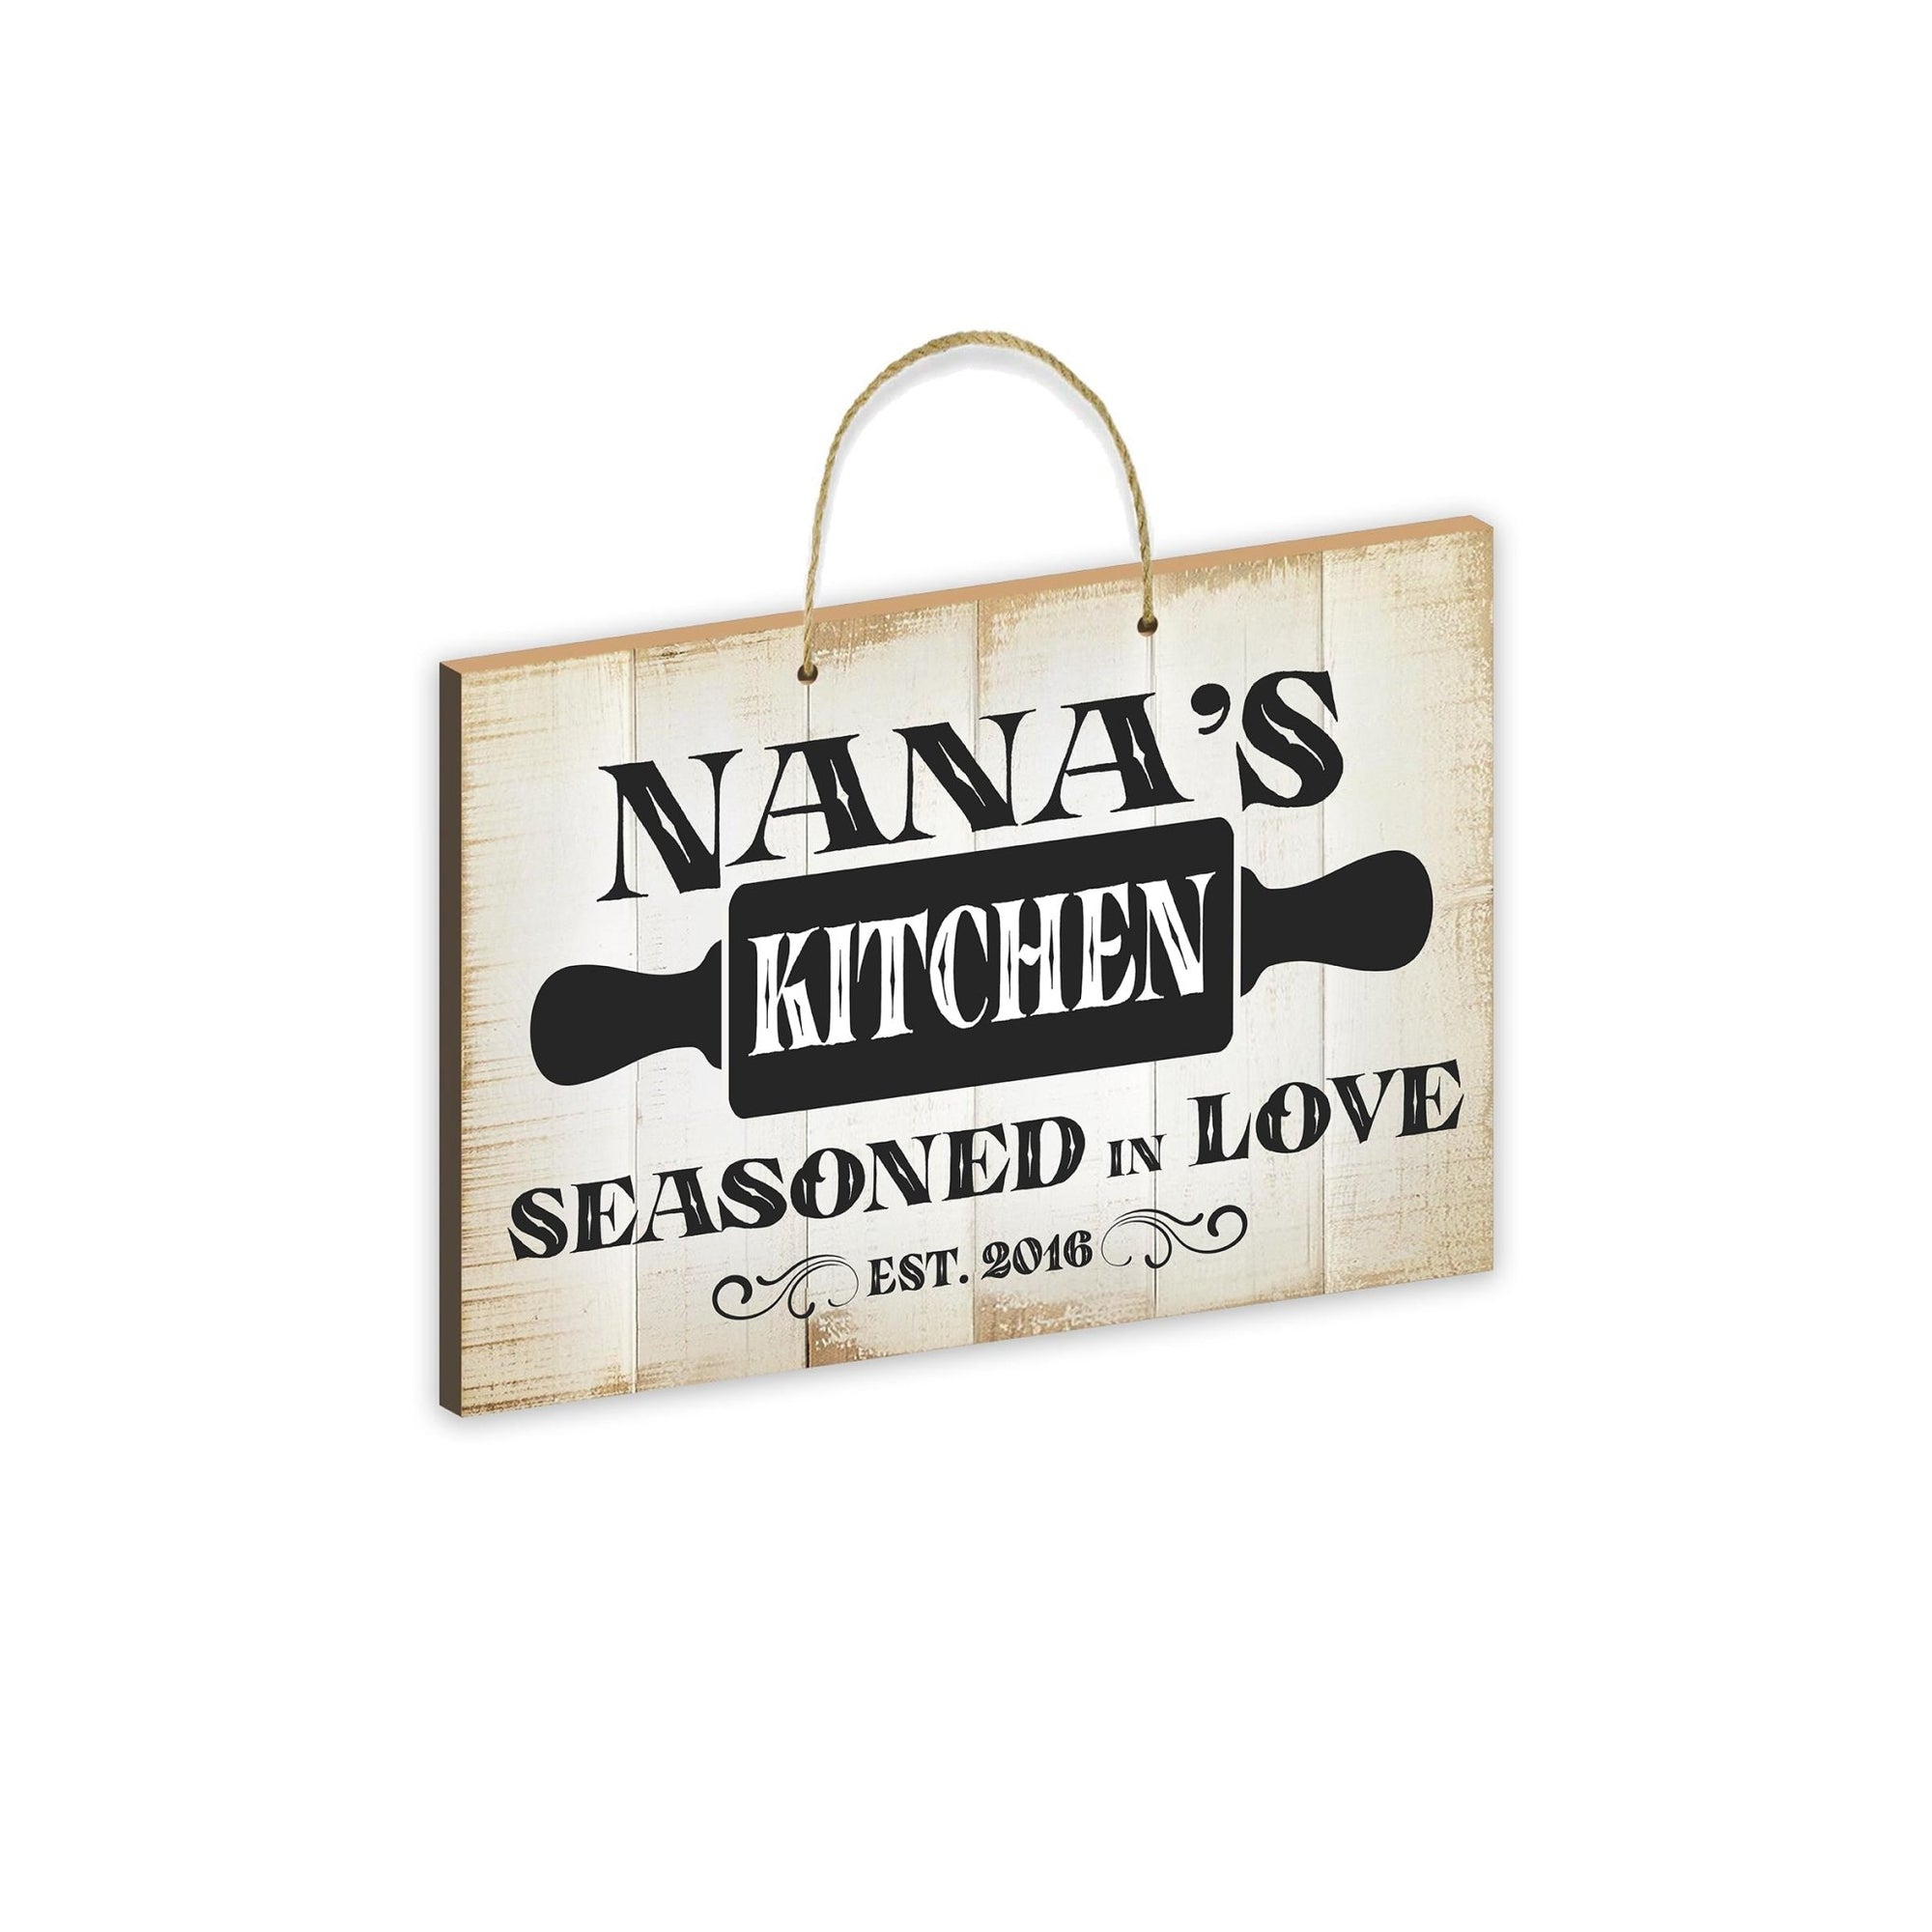 Inspirational Wooden Rustic Wall Hanging Rope Sign Kitchen Home Décor - Seasoned In Love [KITCHEN] - LifeSong Milestones